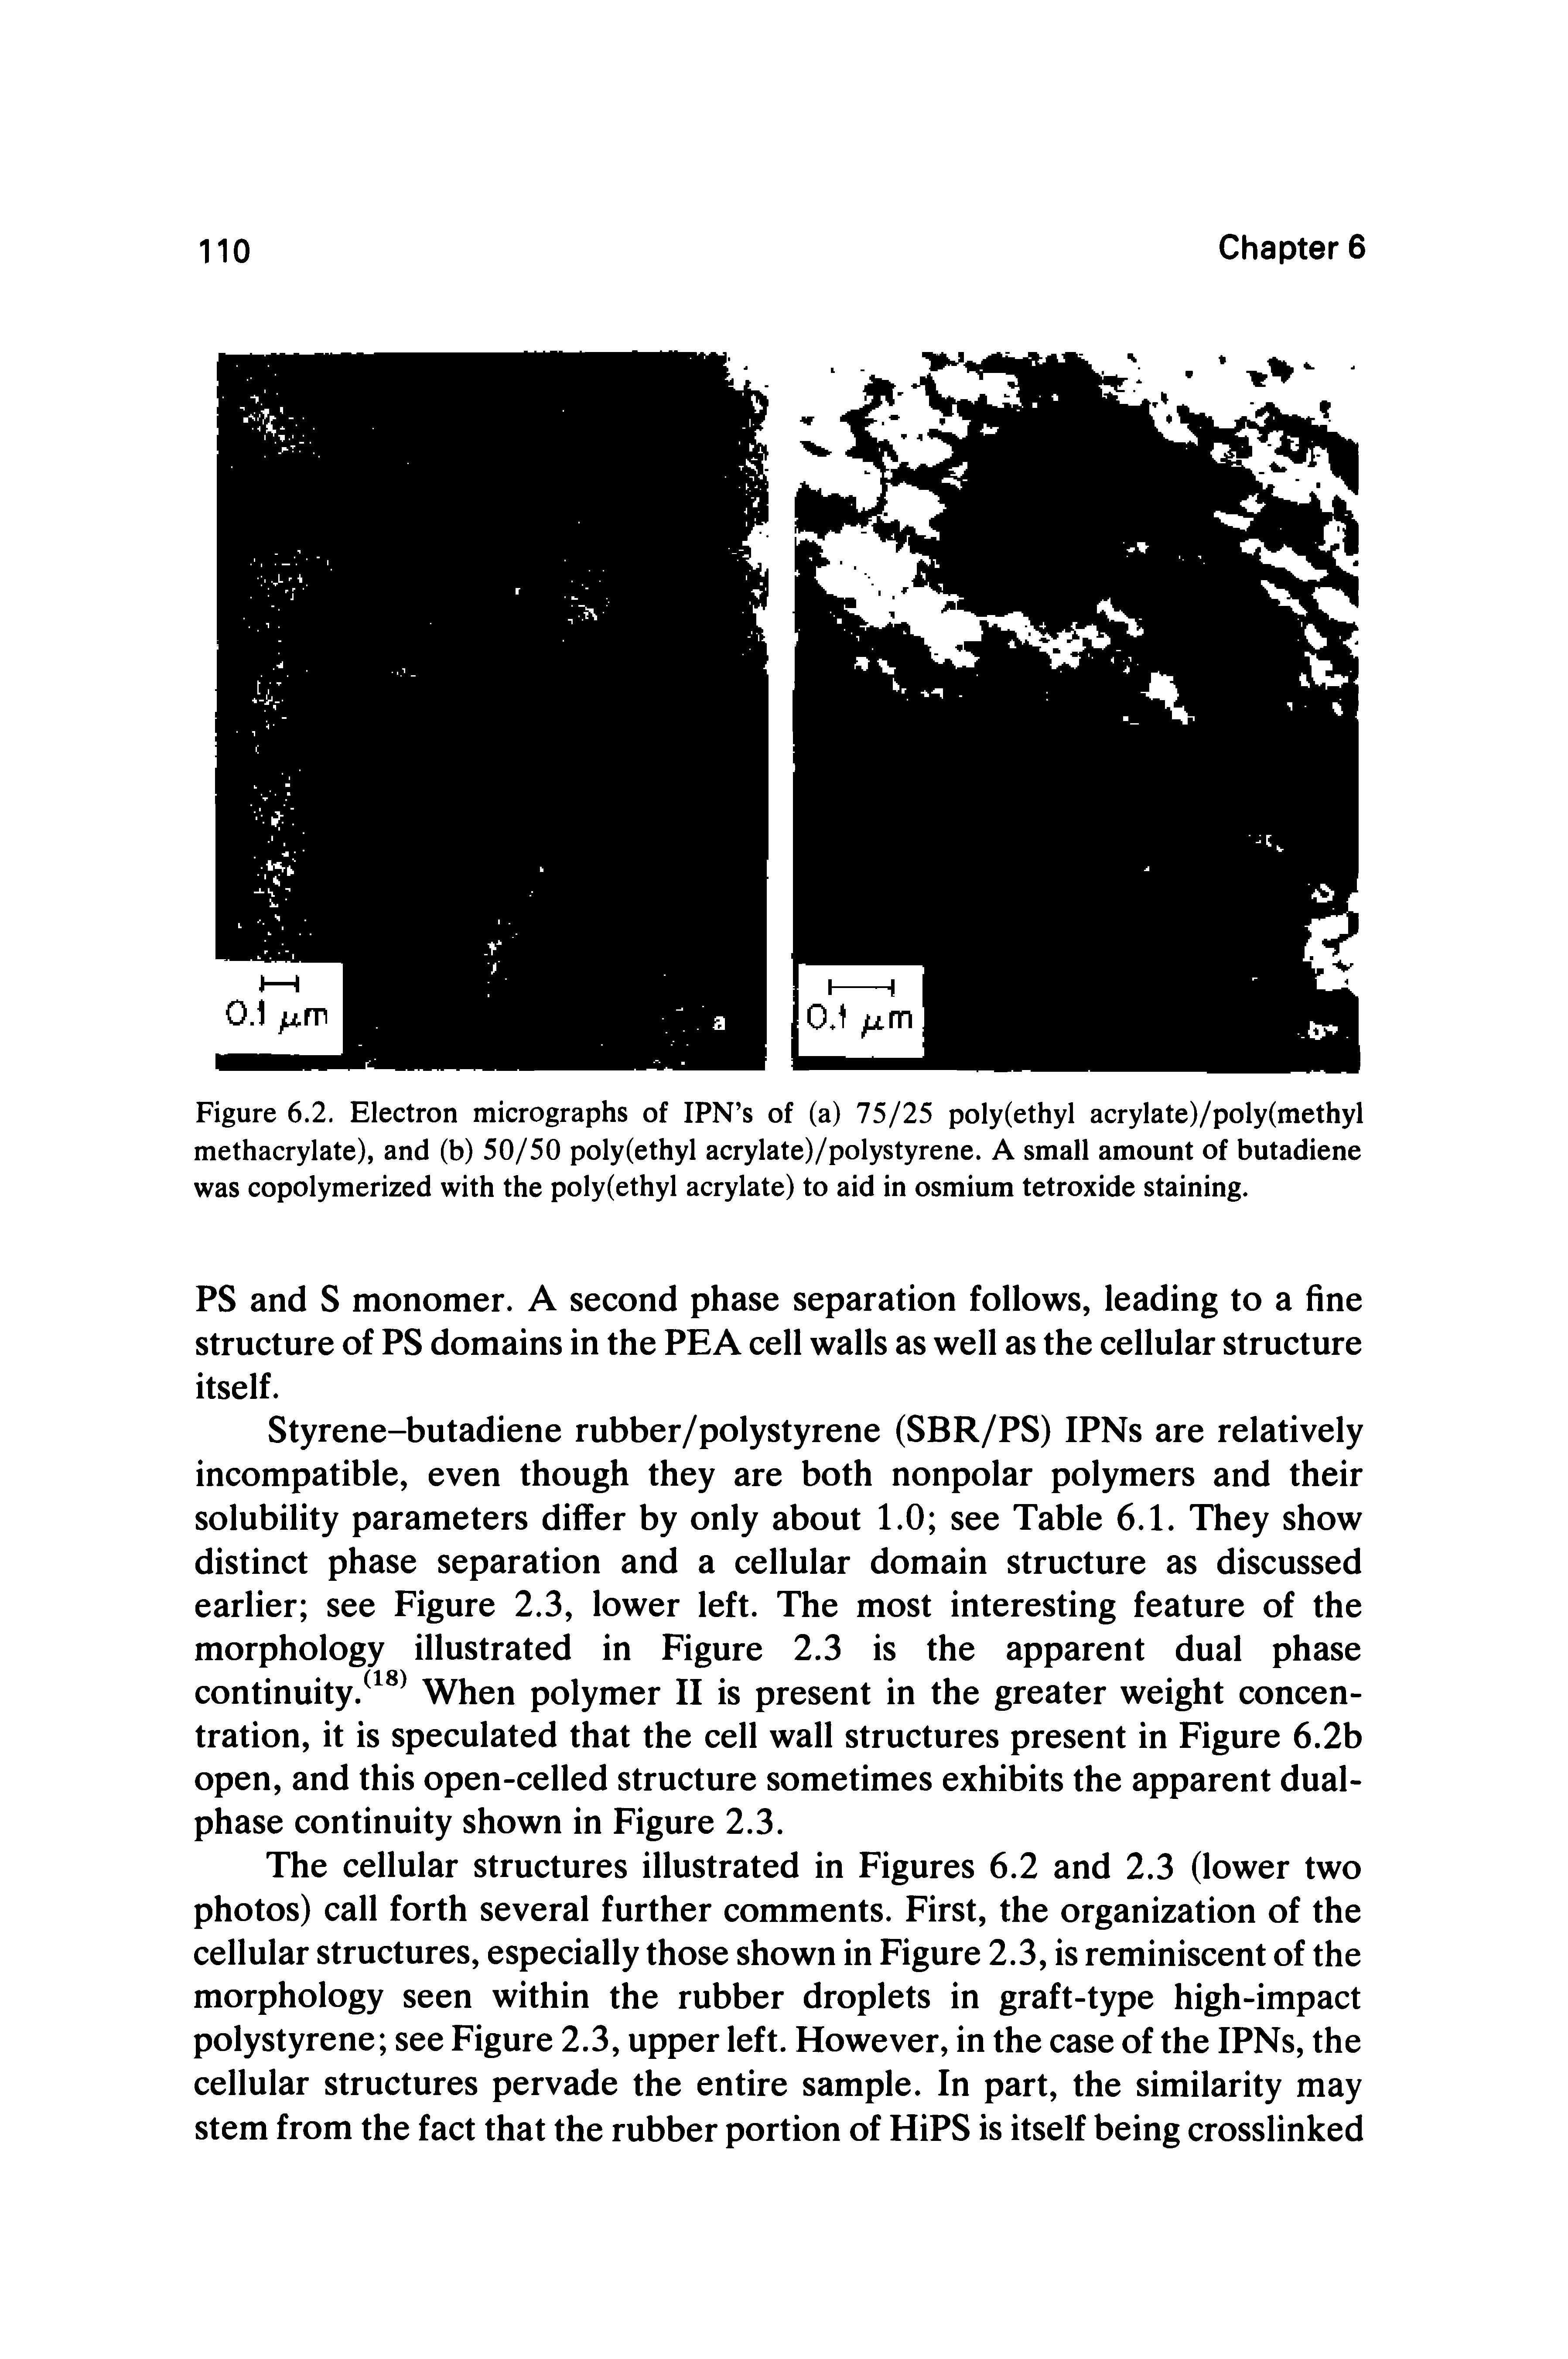 Figure 6.2. Electron micrographs of IPN s of (a) 75/25 poly(ethyl acrylate)/poly(methyl methacrylate), and (b) 50/50 poly (ethyl acrylate)/polystyrene. A small amount of butadiene was copolymerized with the poly(ethyl acrylate) to aid in osmium tetroxide staining.